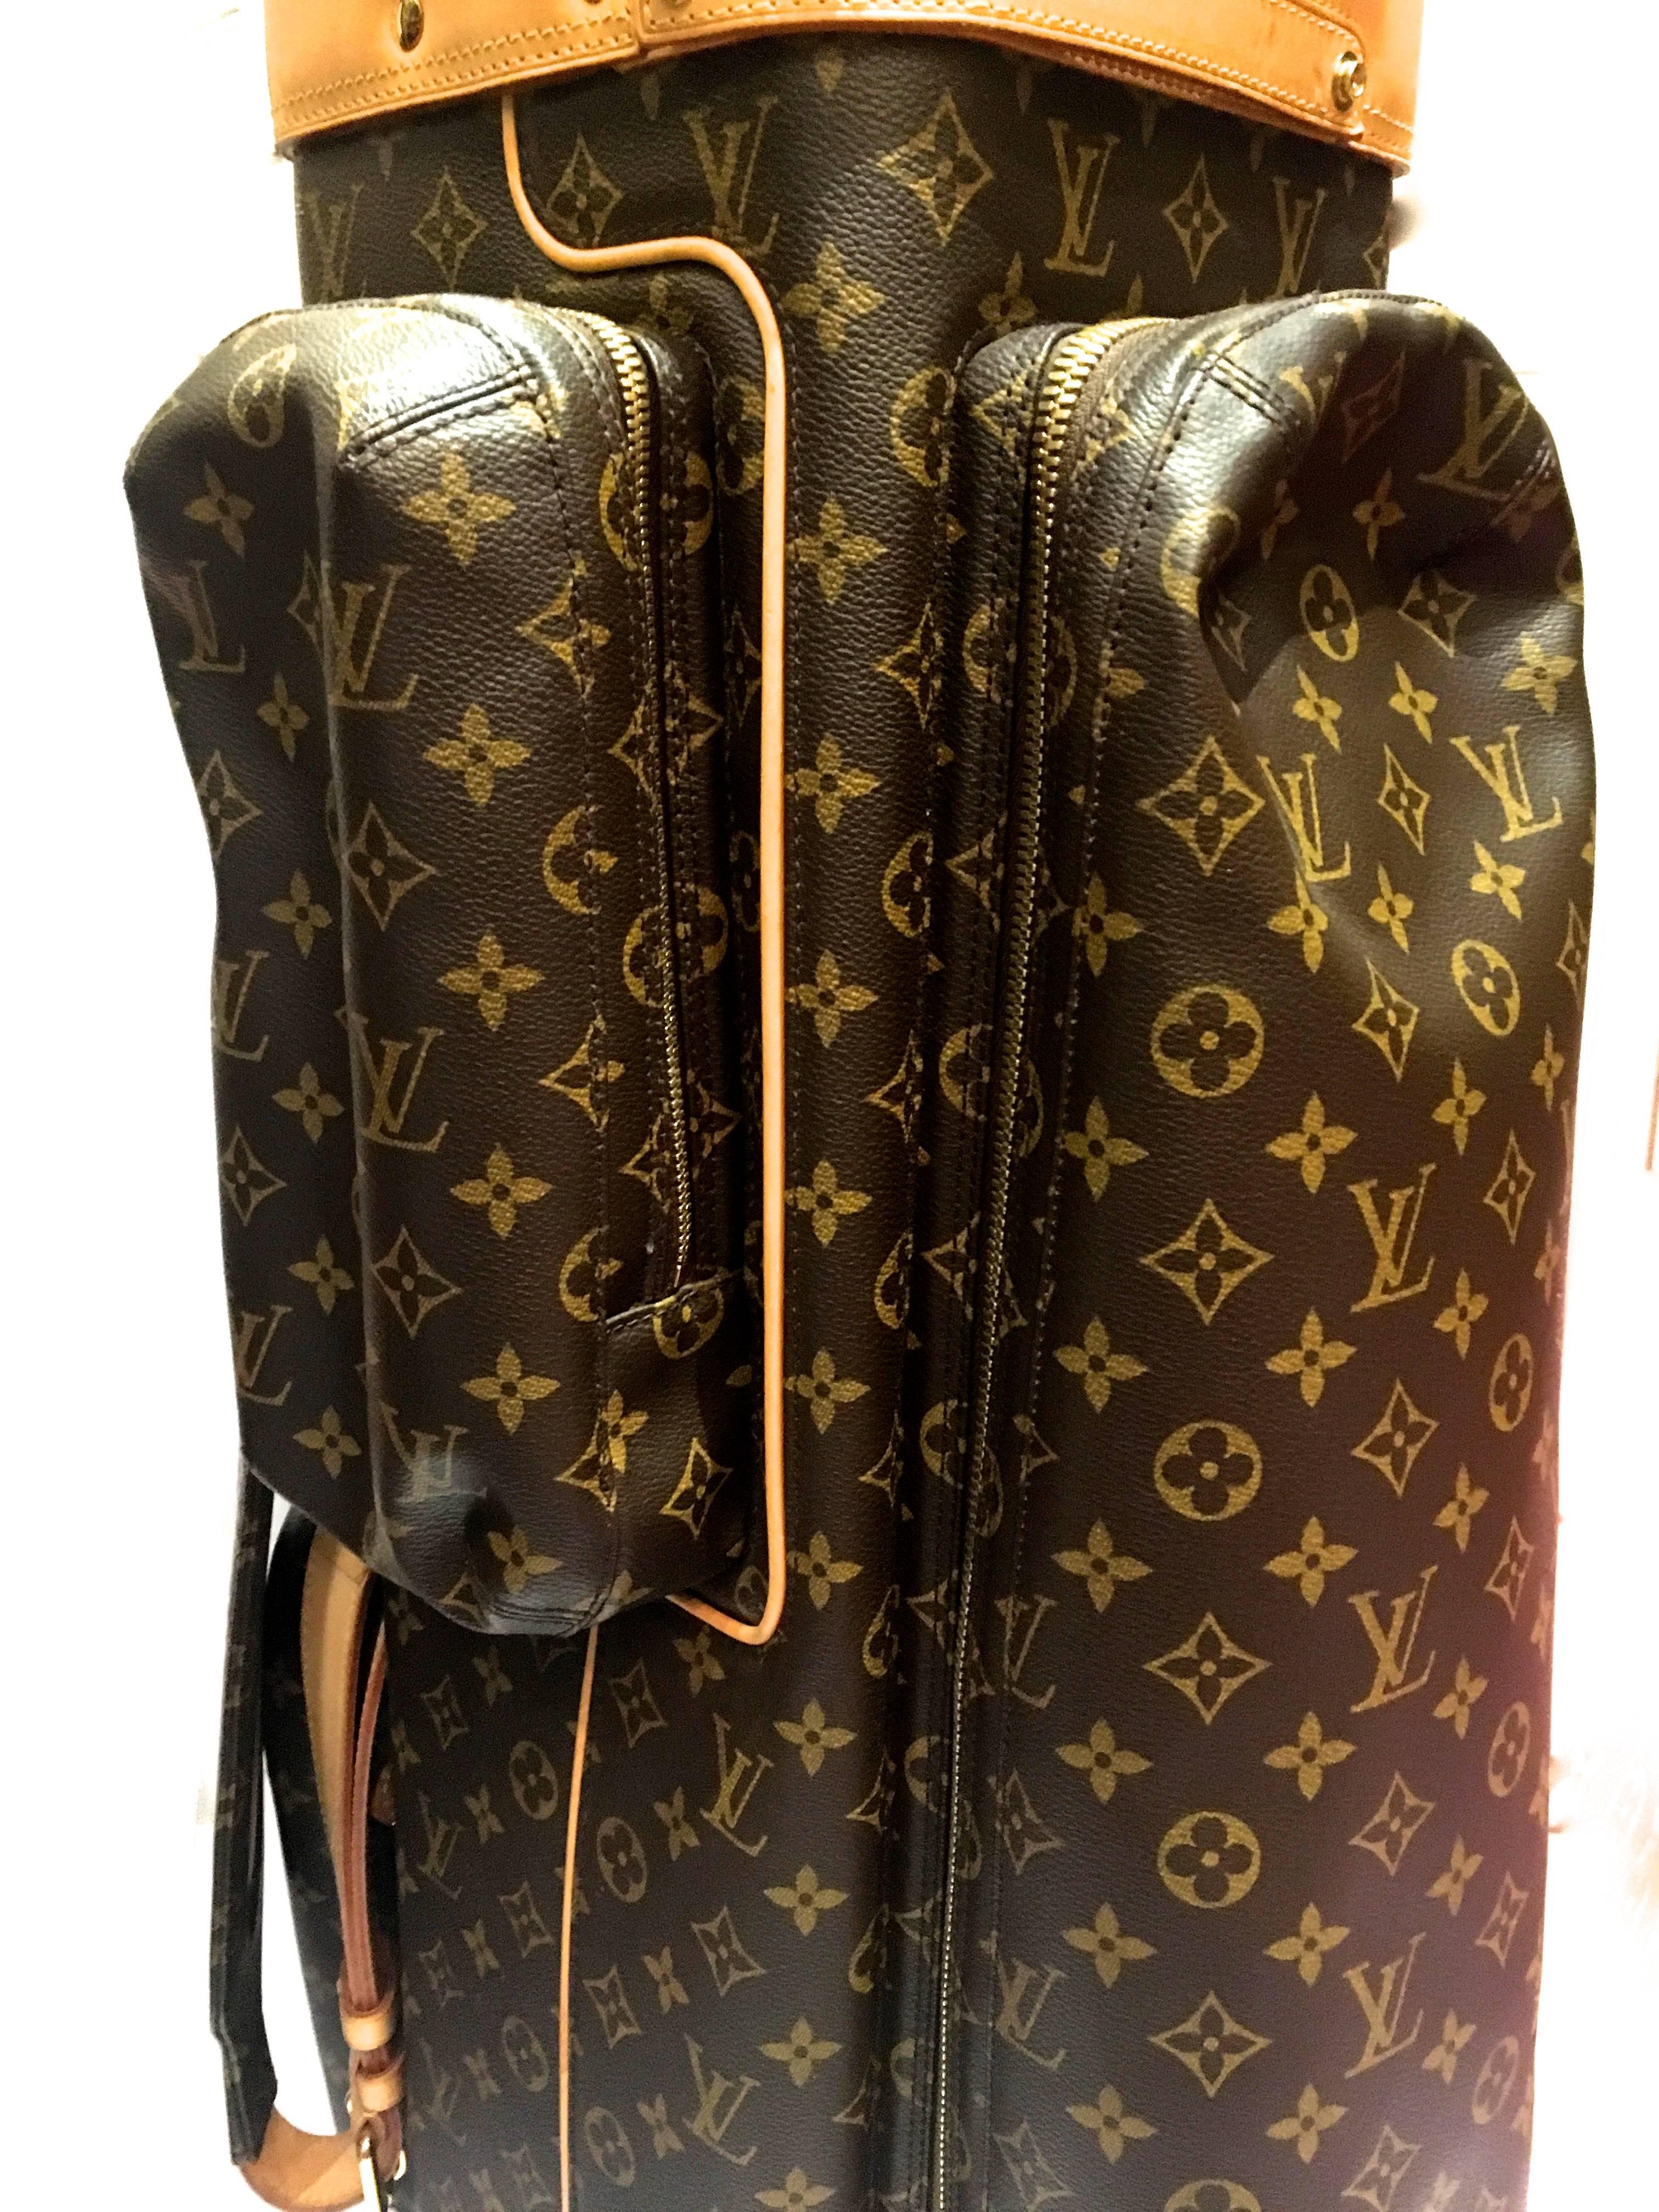 Louis Vuitton Golf Club Bag  In Excellent Condition For Sale In Boca Raton, FL